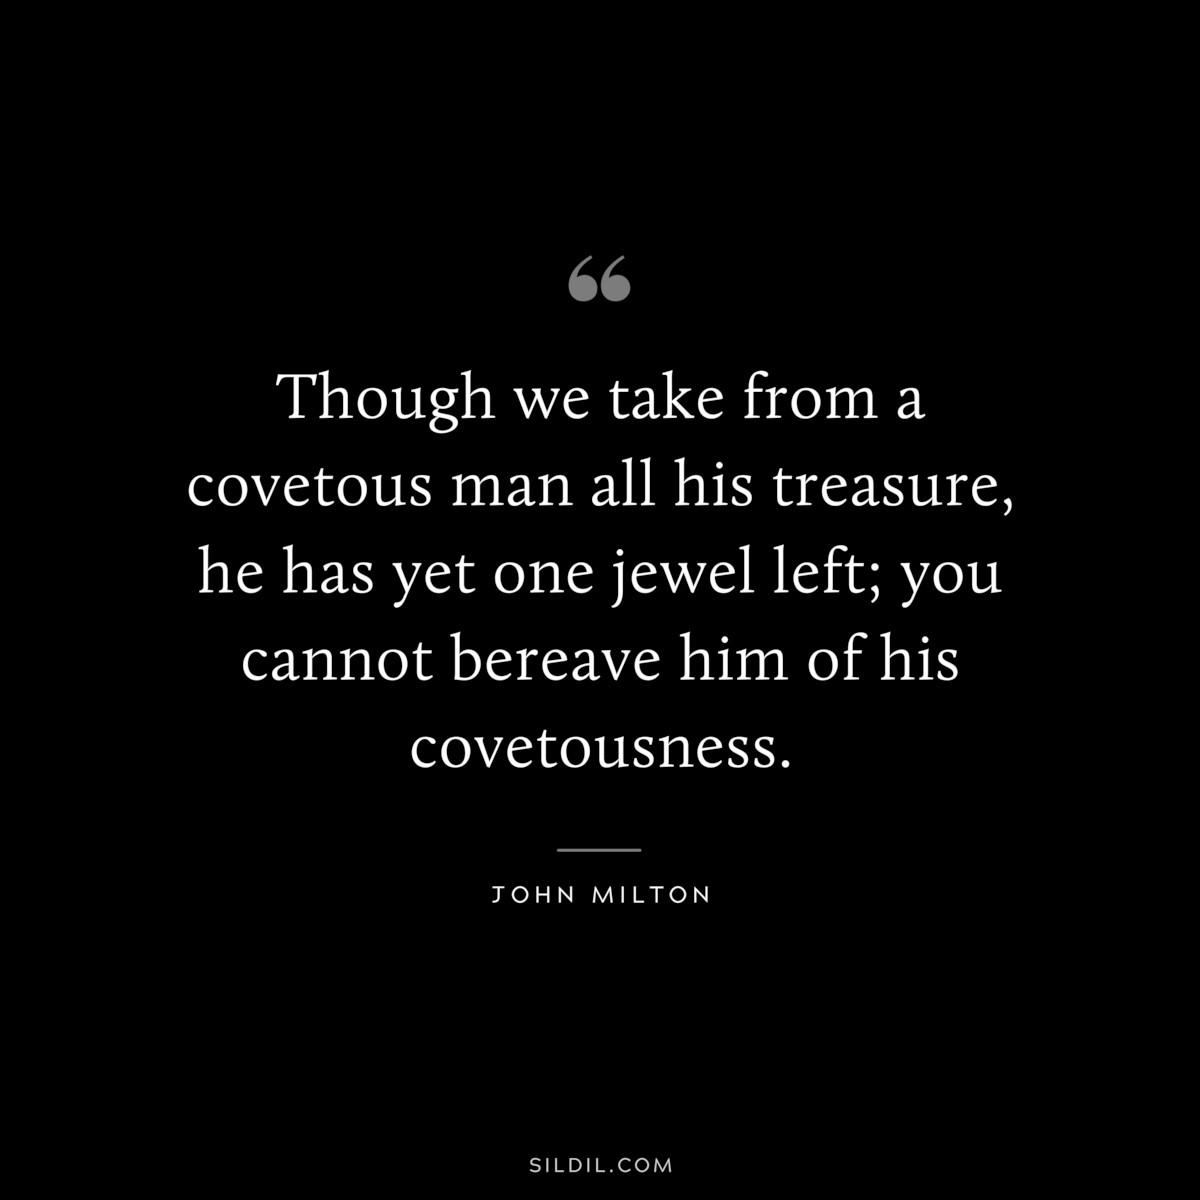 Though we take from a covetous man all his treasure, he has yet one jewel left; you cannot bereave him of his covetousness. ― John Milton